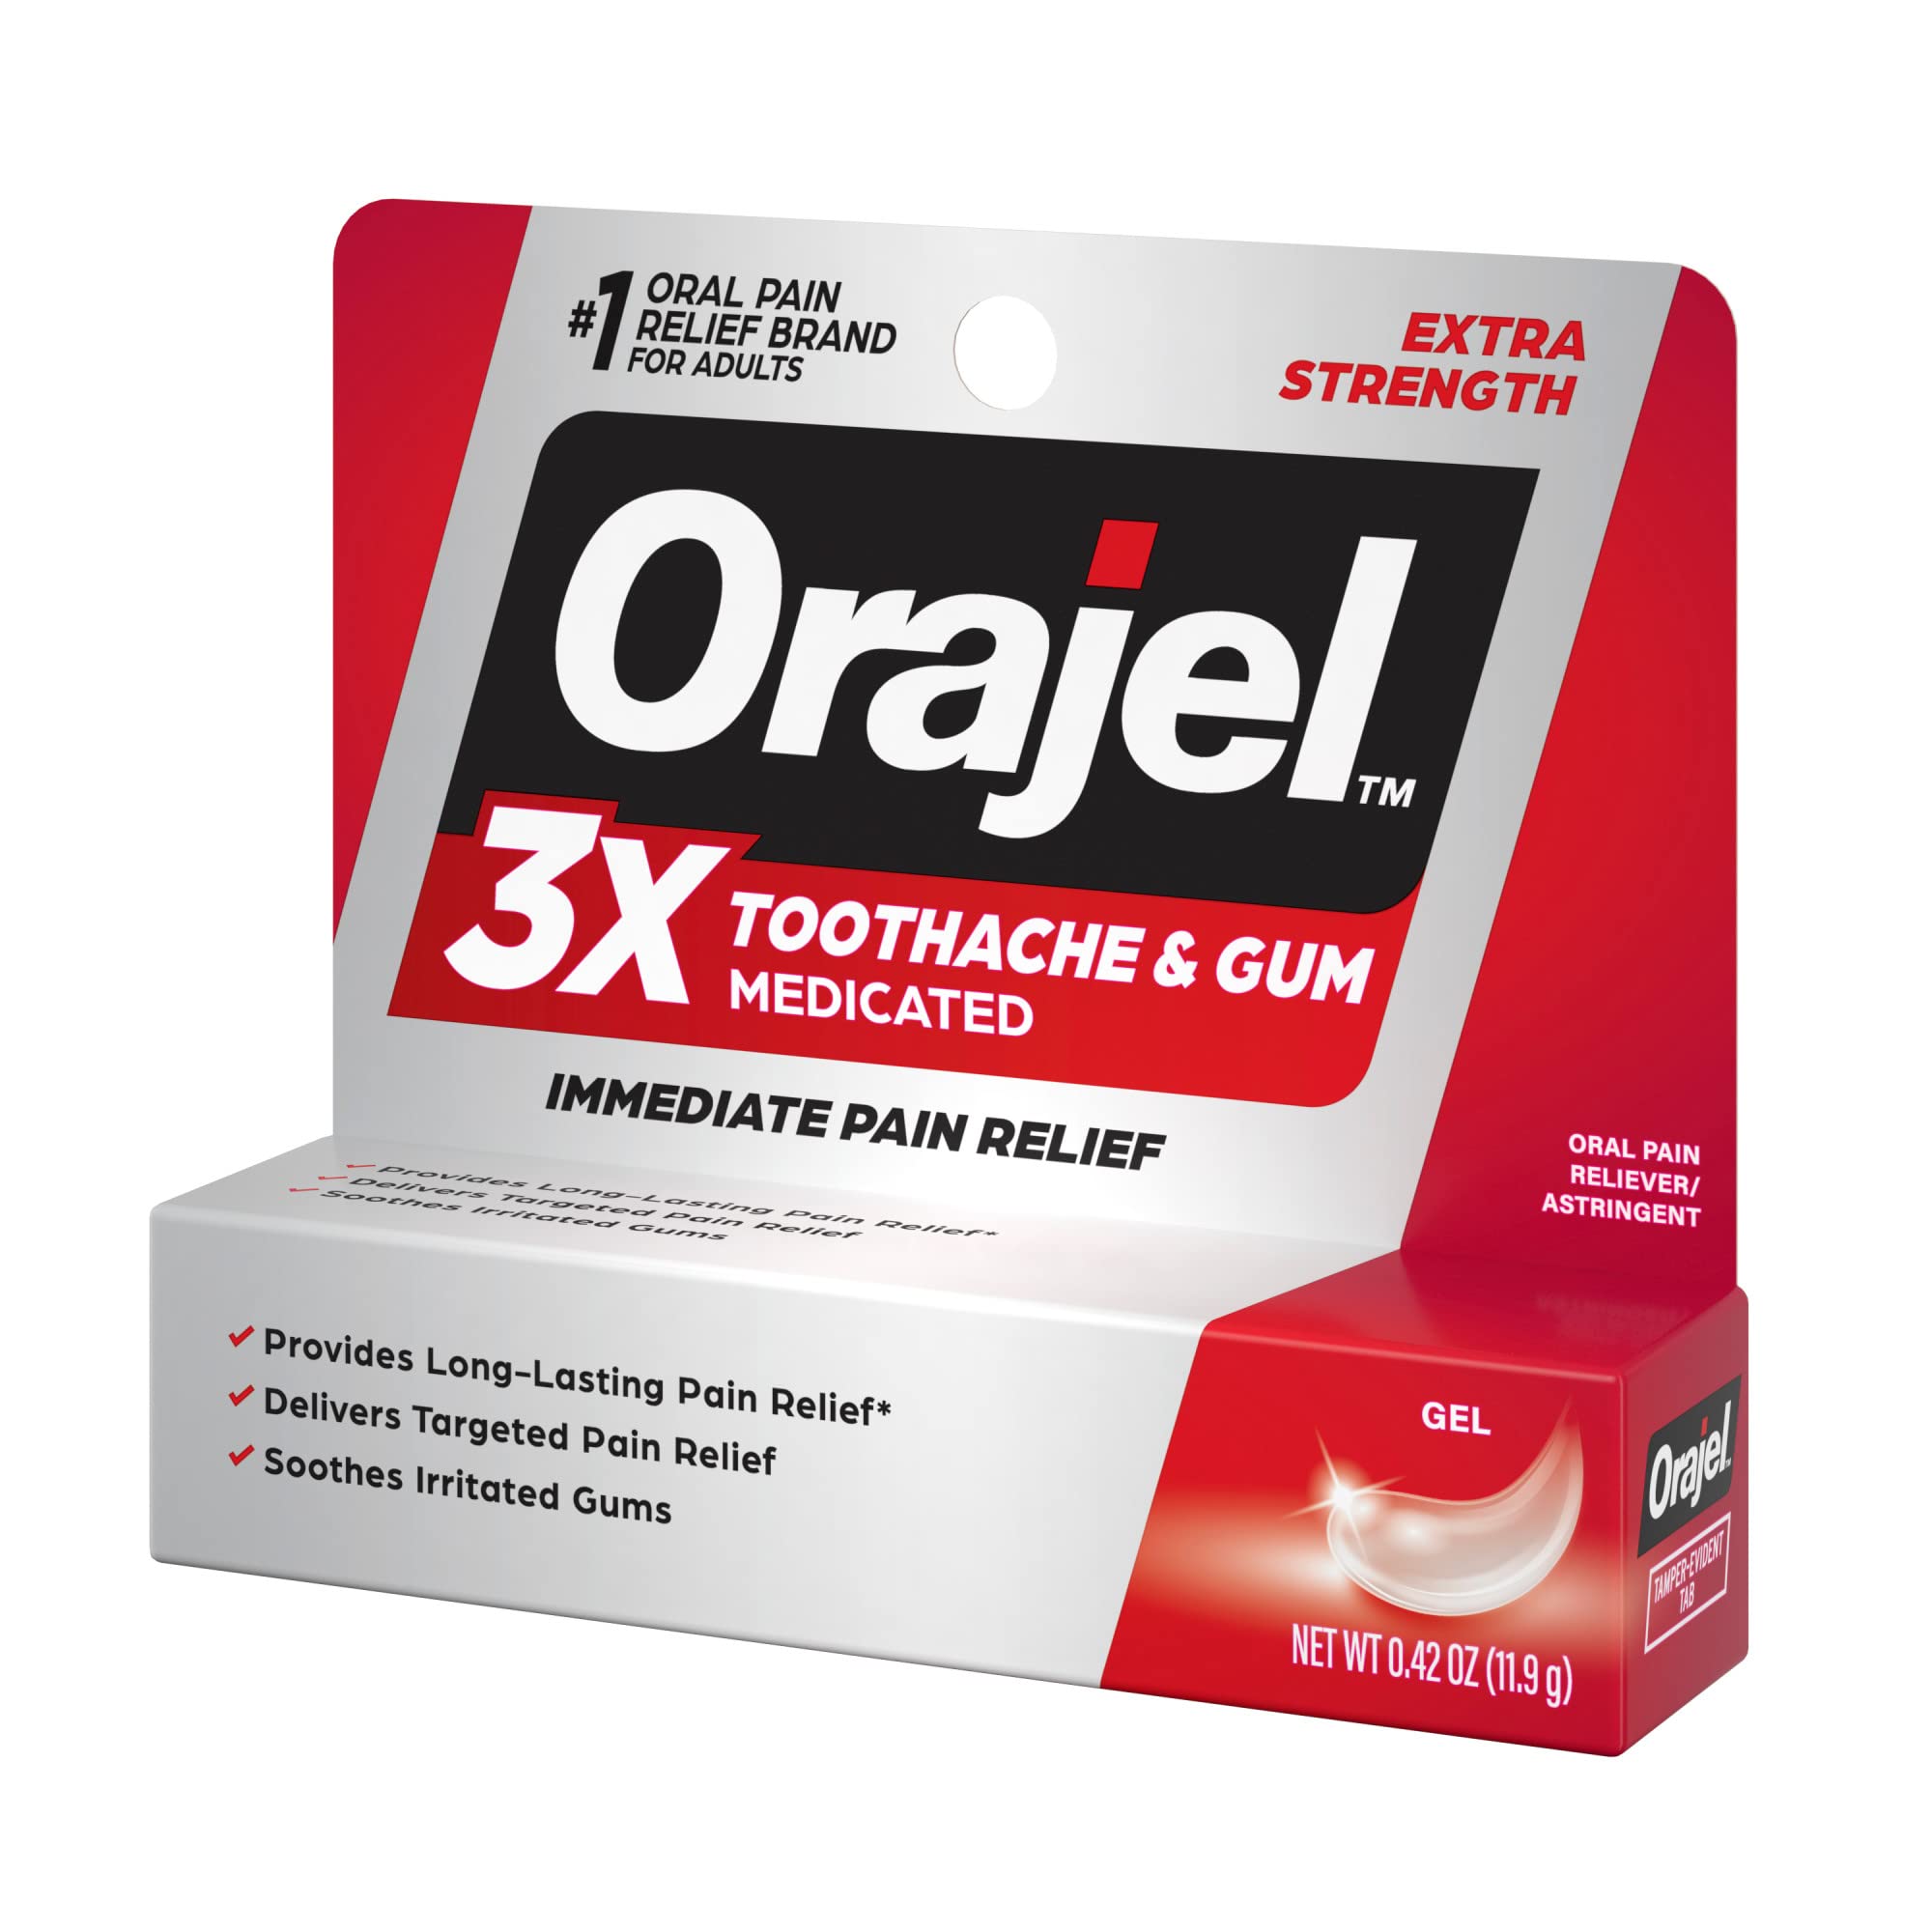 Orajel 3X for Toothache & Gum Pain: Maximum Gel Tube 0.42oz - From #1 Oral Pain Relief Brand - Orajel for Instant Pain Relief